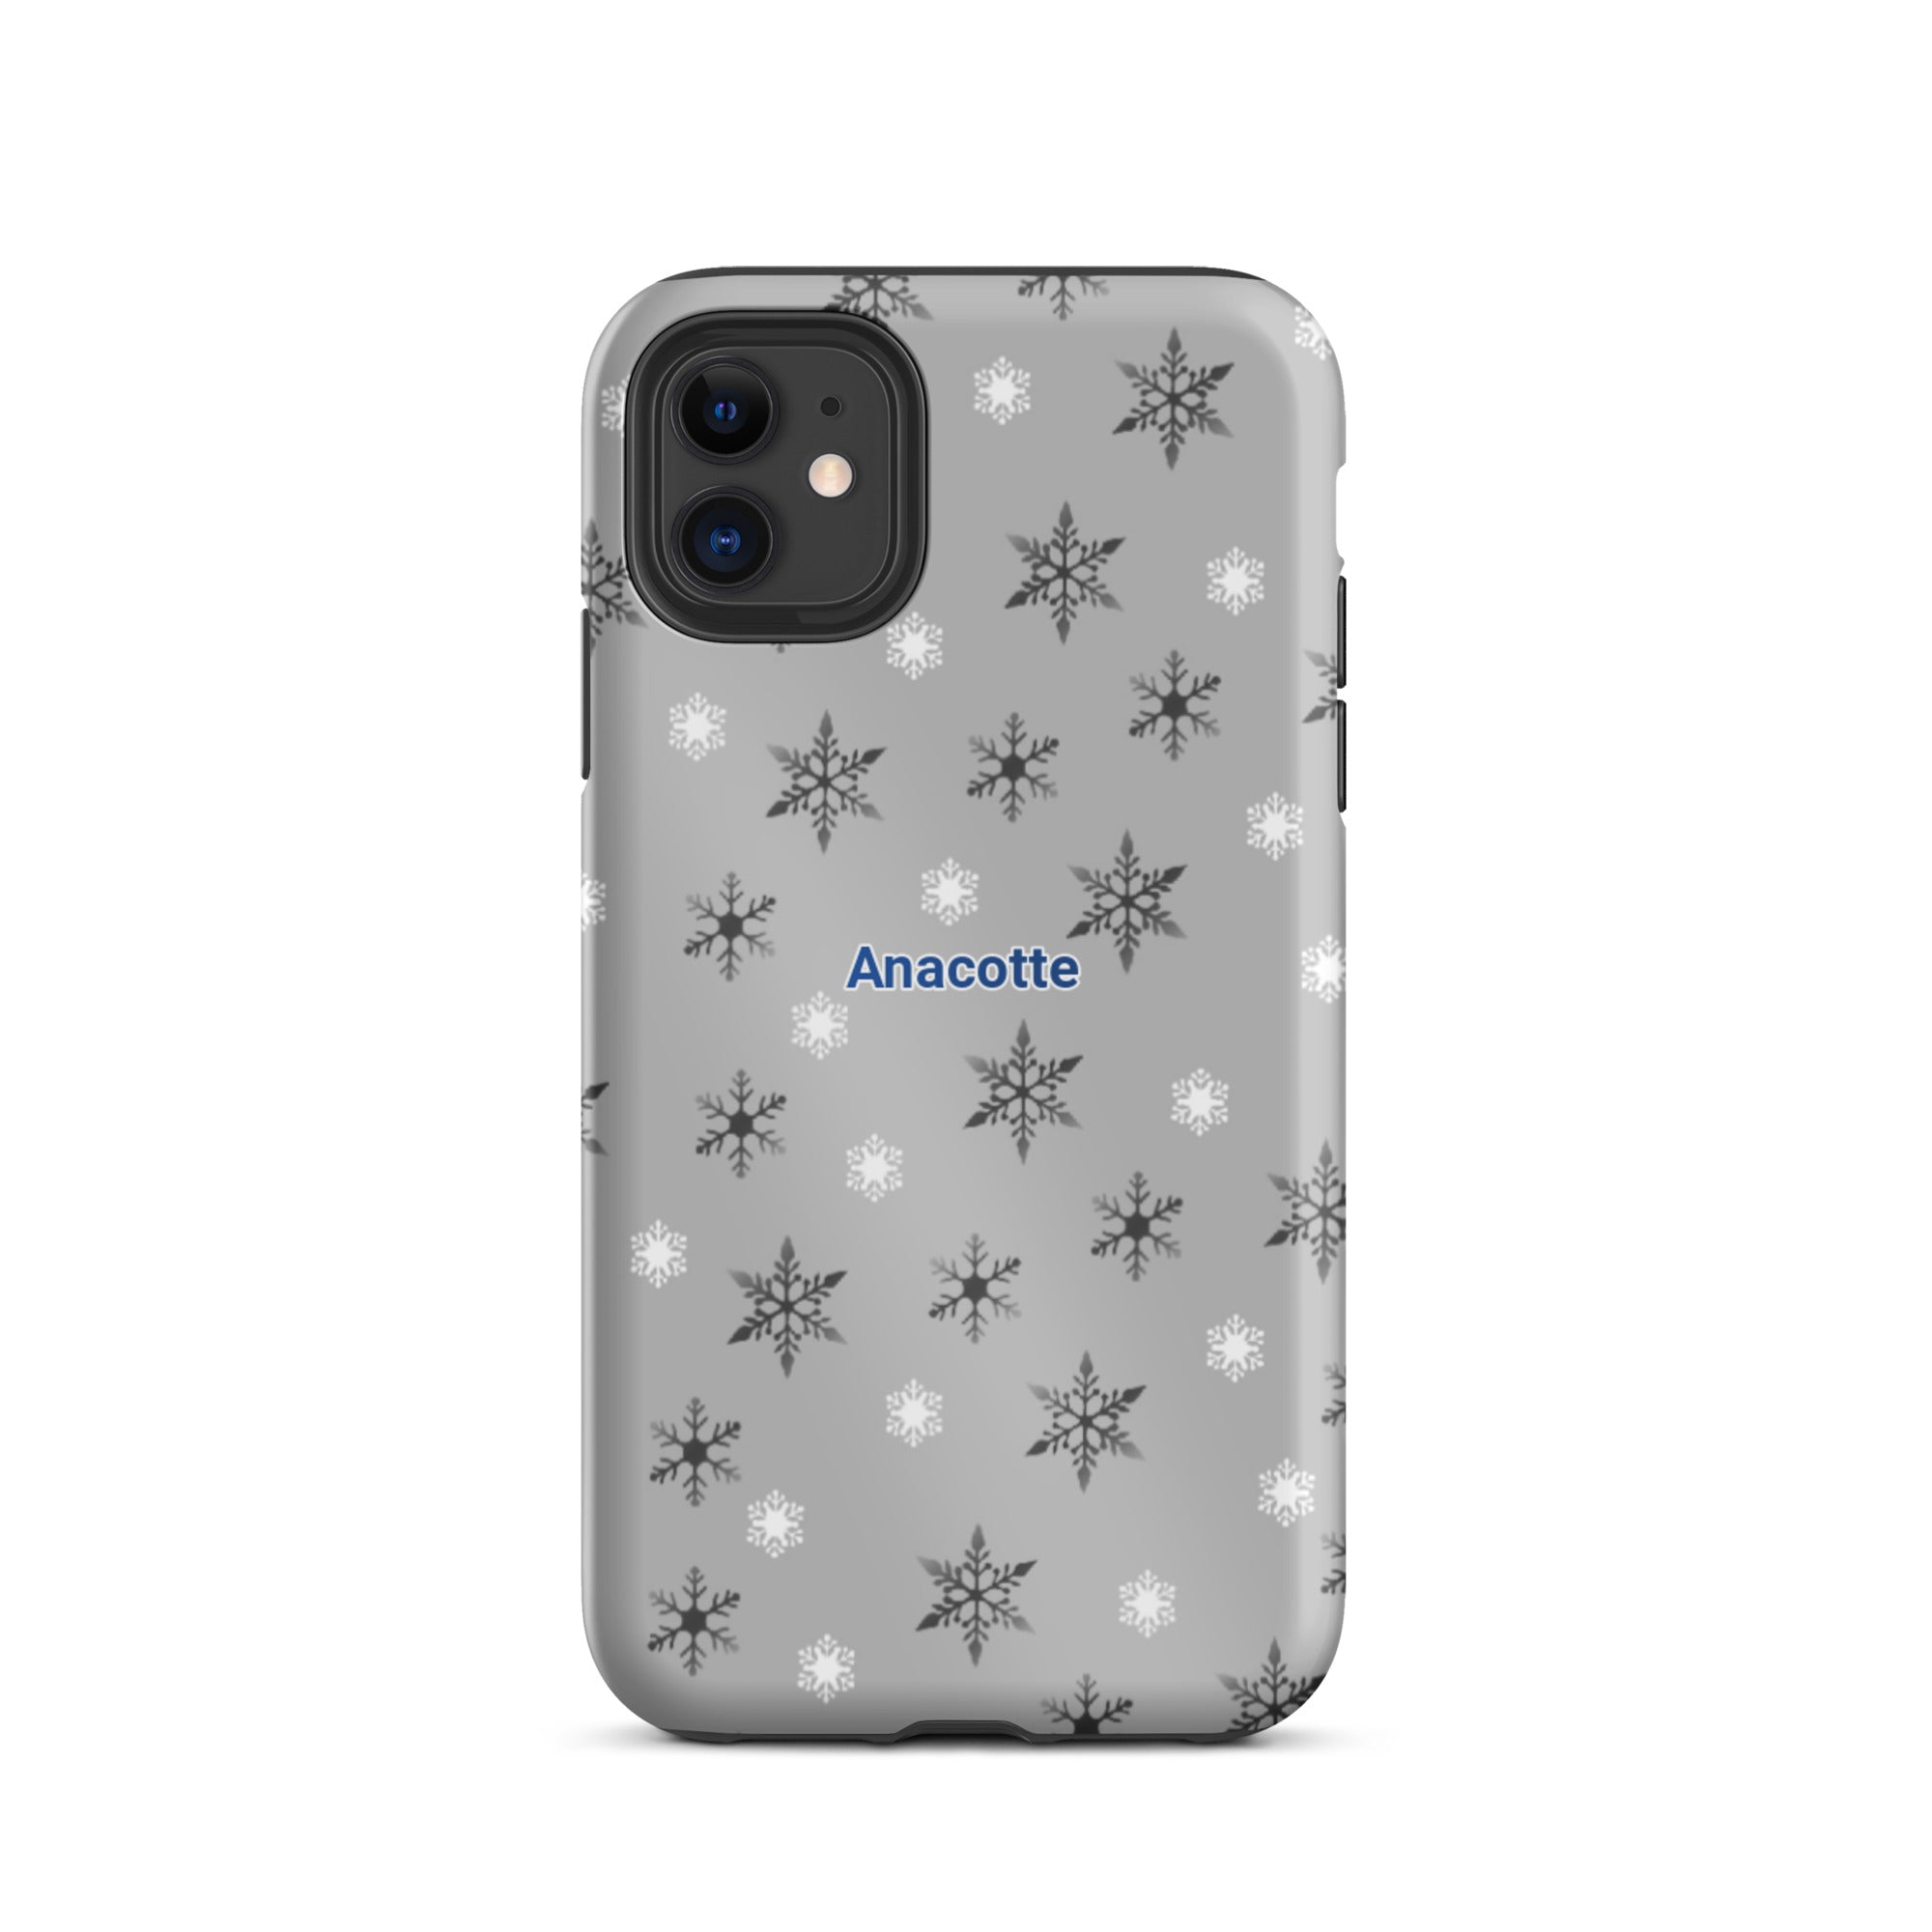 iPhone 14, 13, 12, 11 Christmas Theme iPhone Cases gray Anacotte